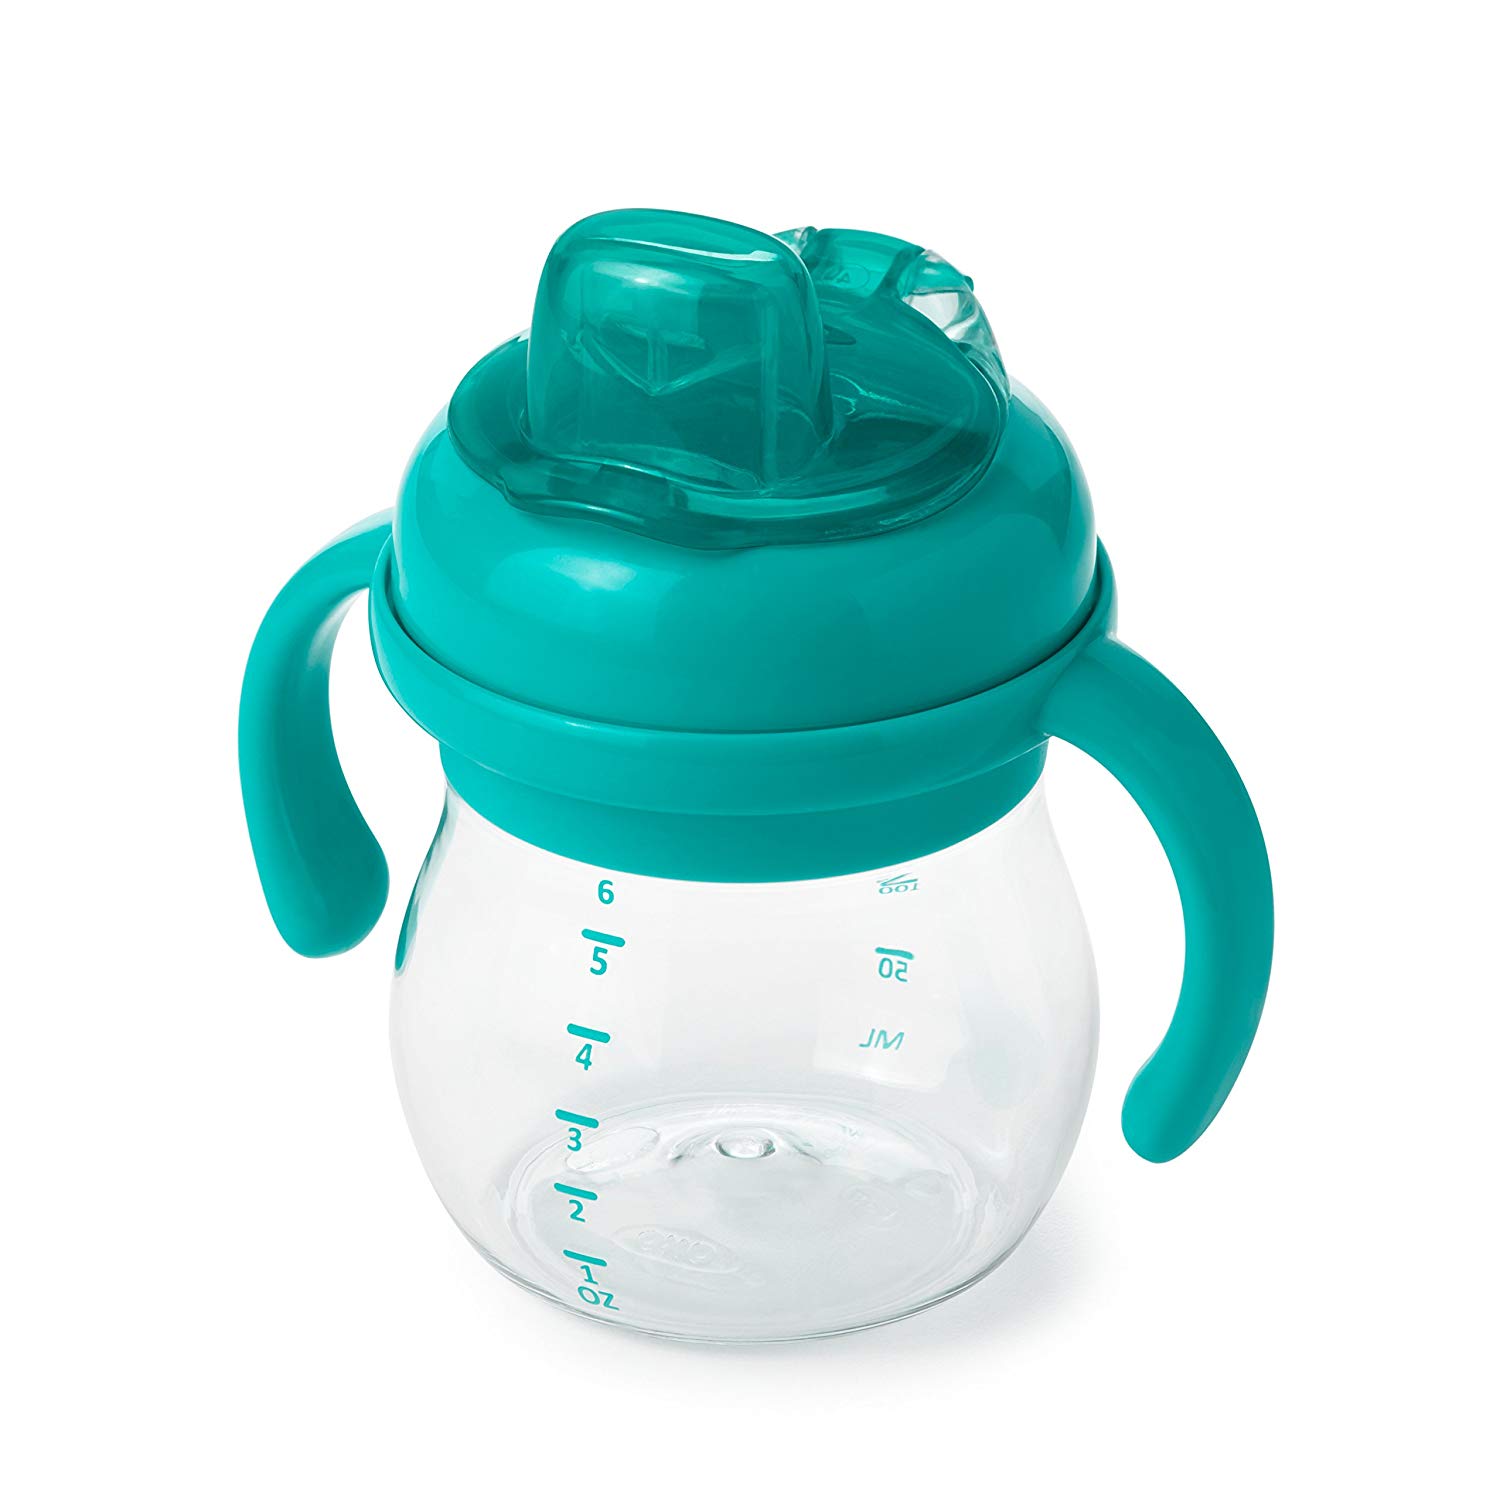 OXO Tot Transitions Straw Cup with Handles 6 oz - Teal